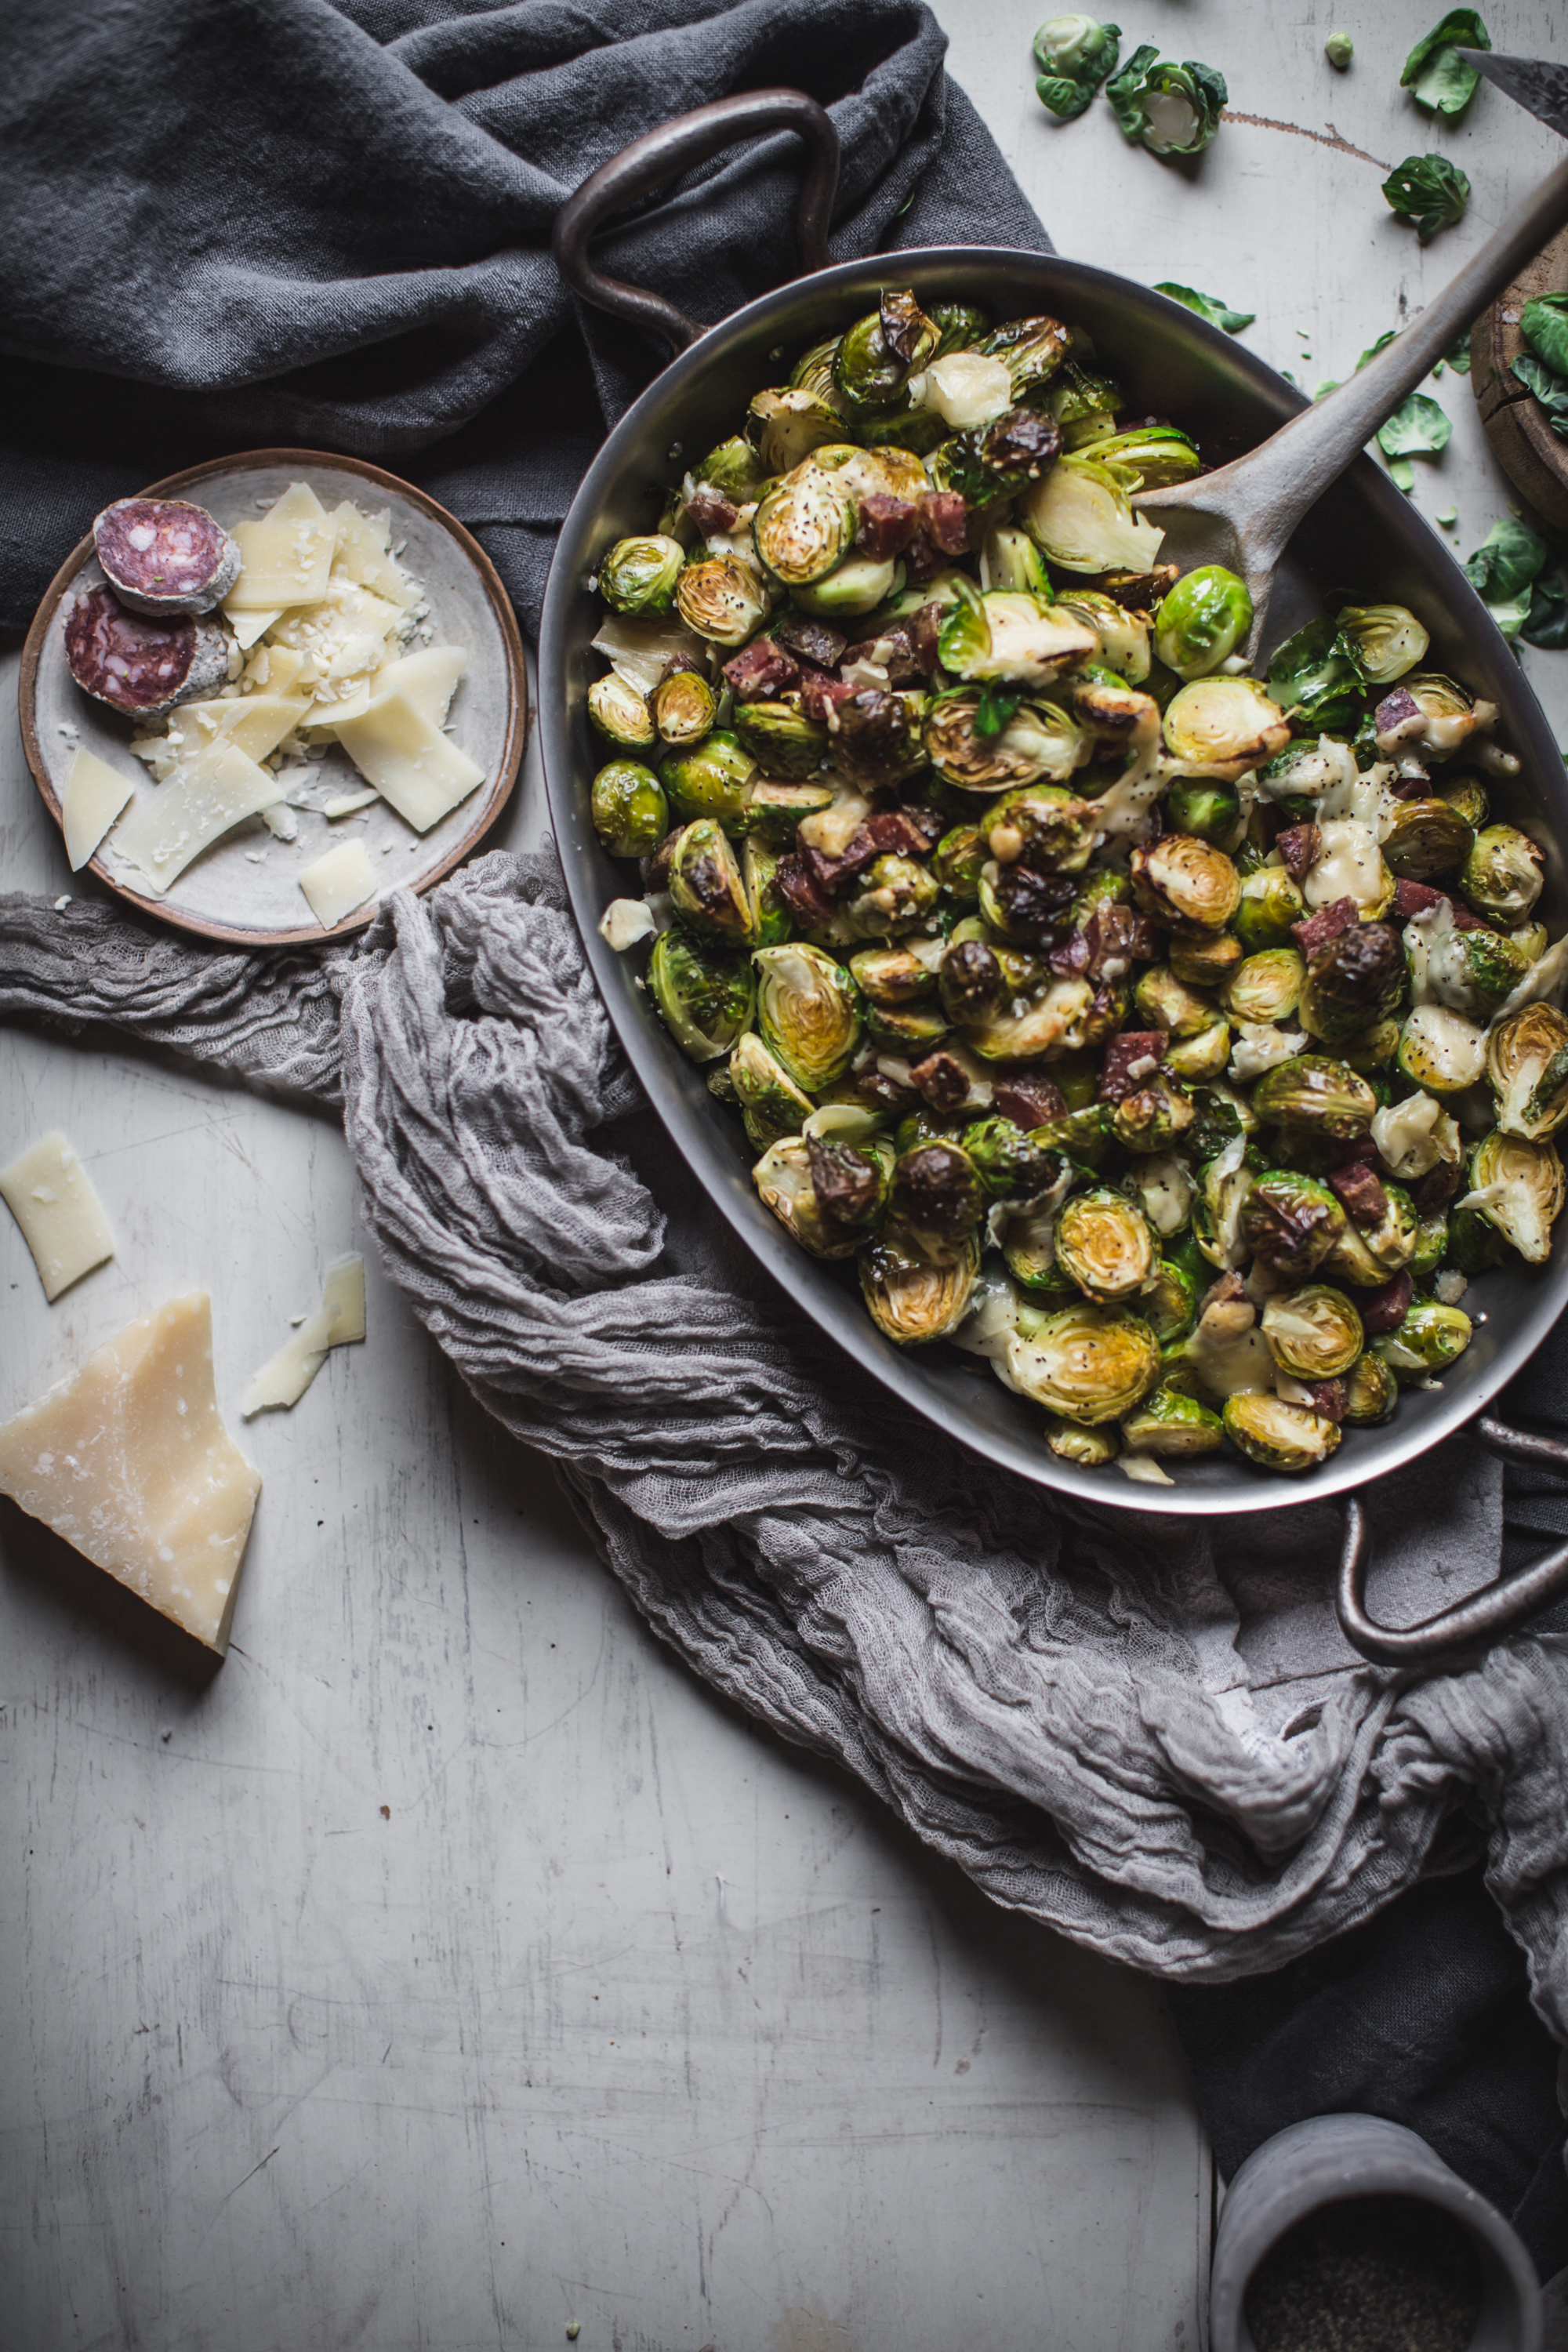 How to Make Roasted Brussel Sprouts by Eva Kosmas Flores